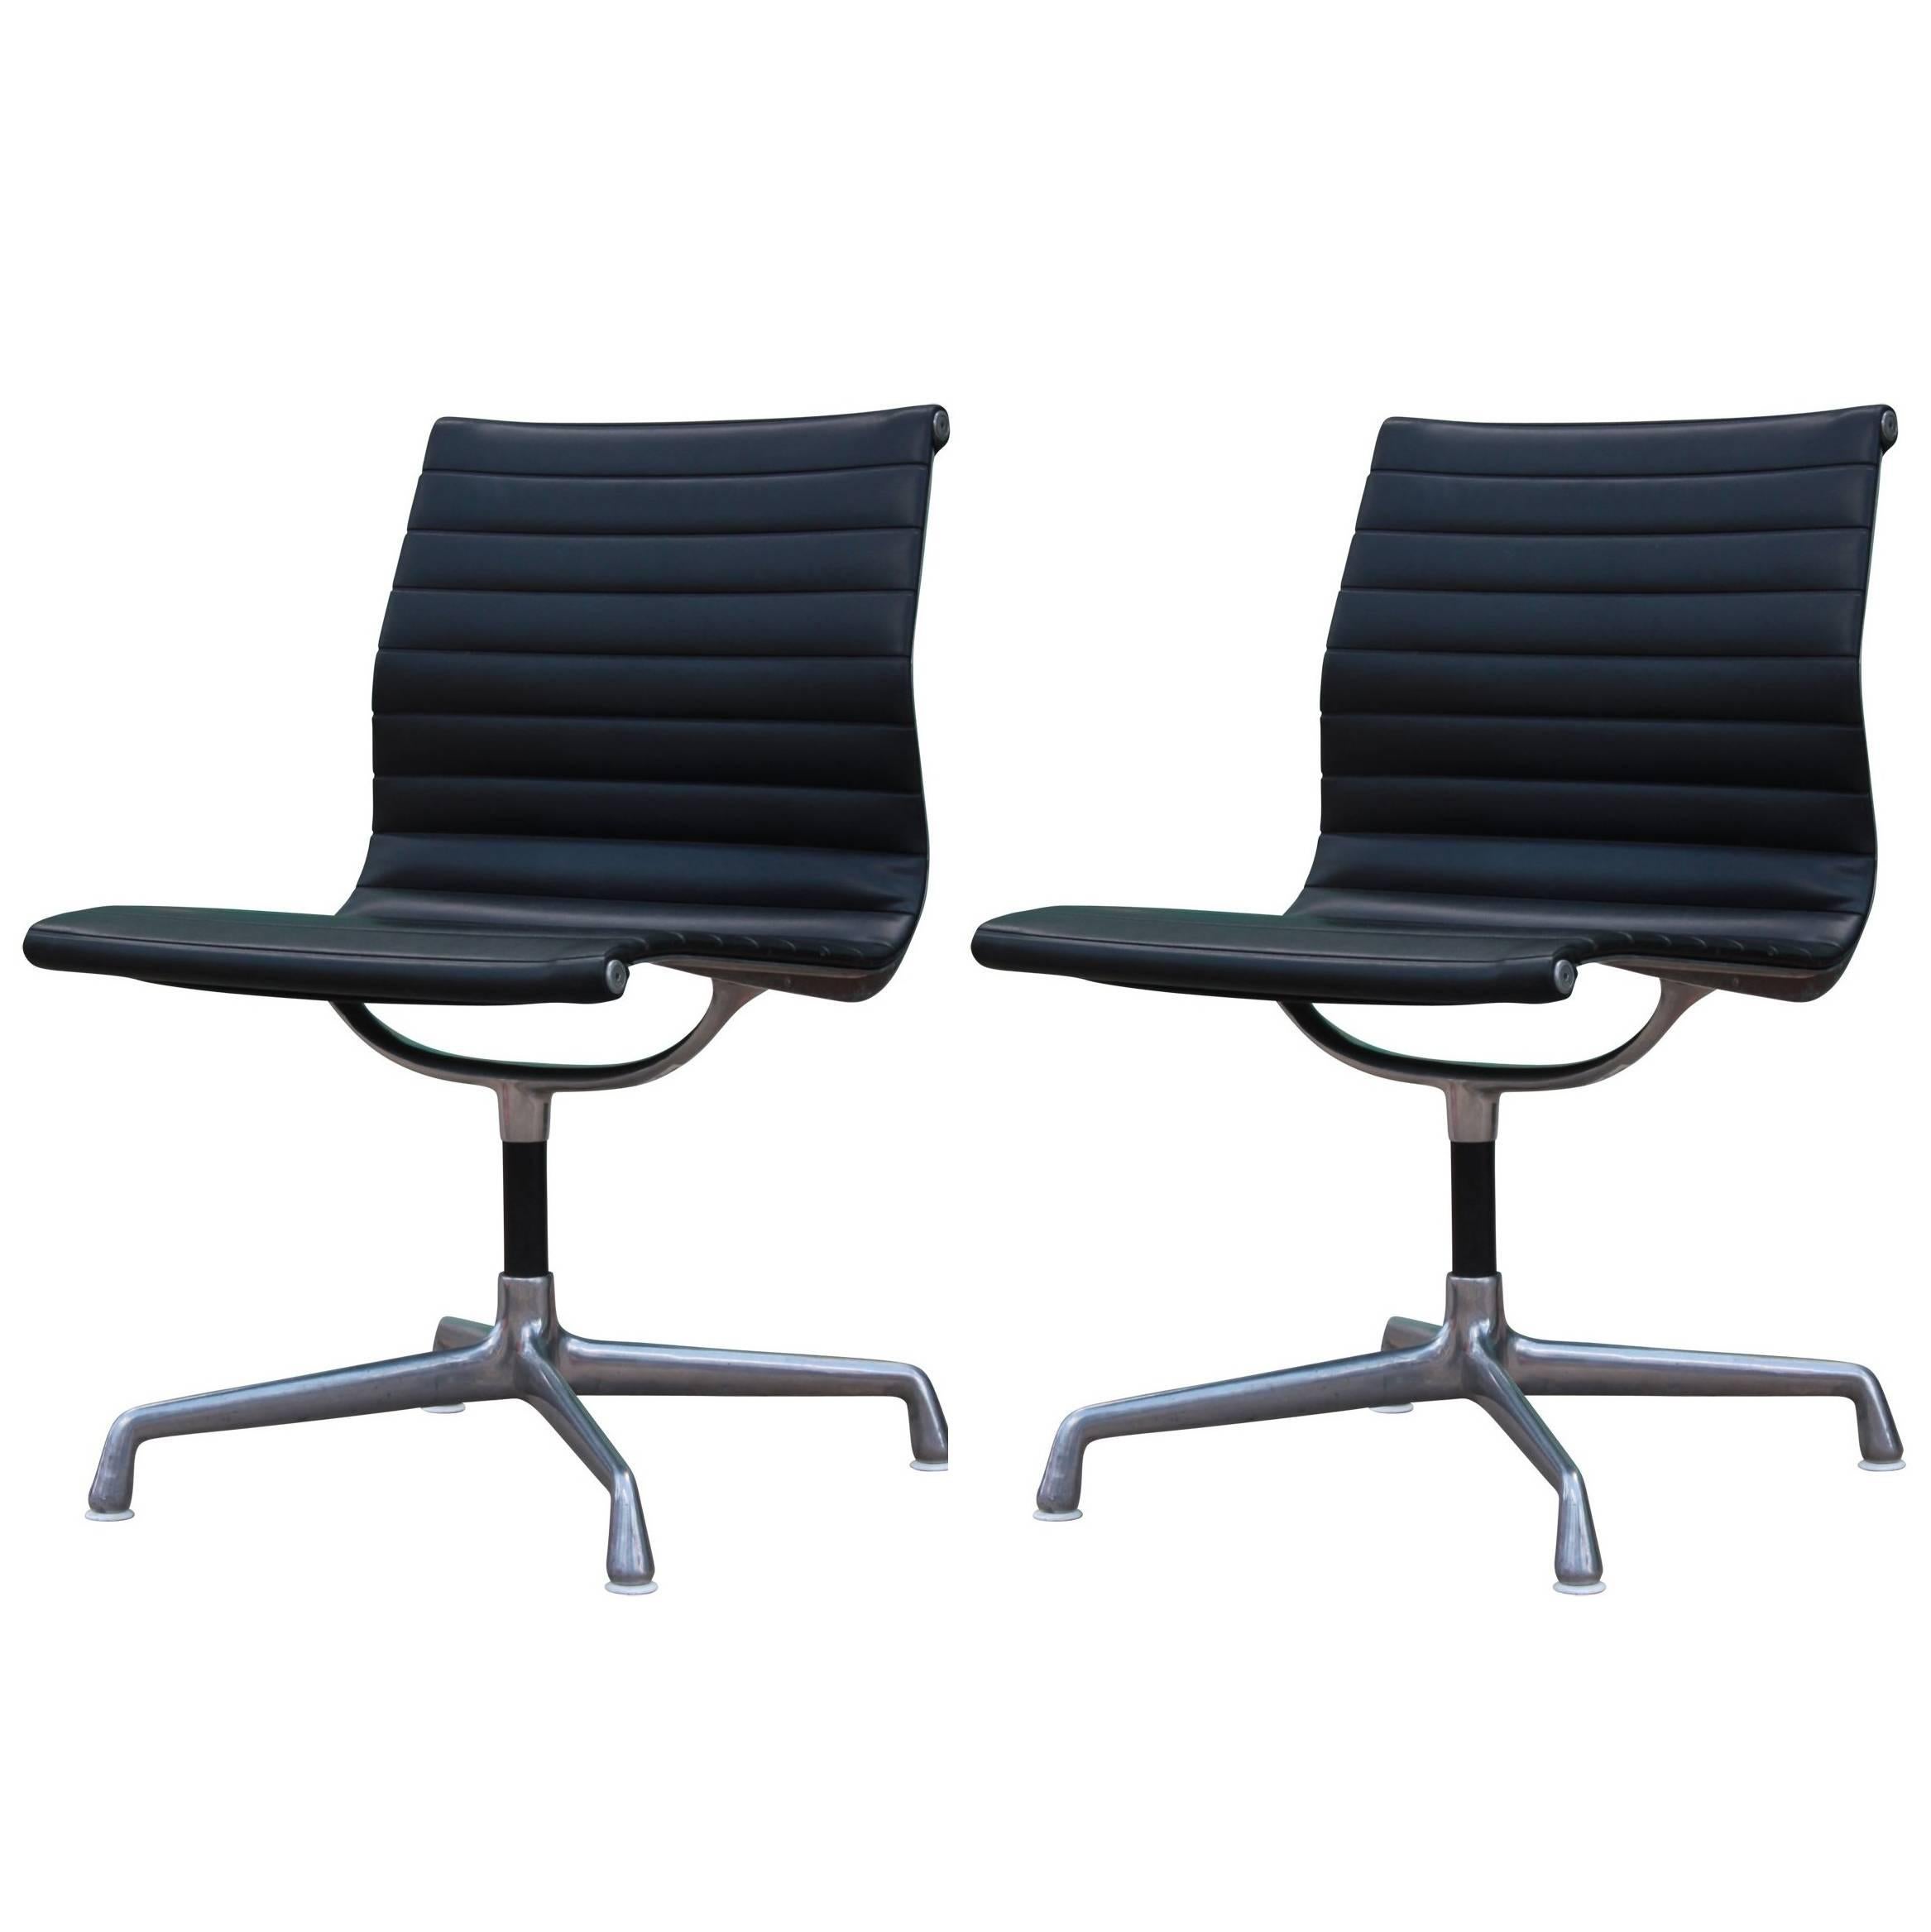 Pair of Herman Miller Aluminum Group Armless Office Chairs